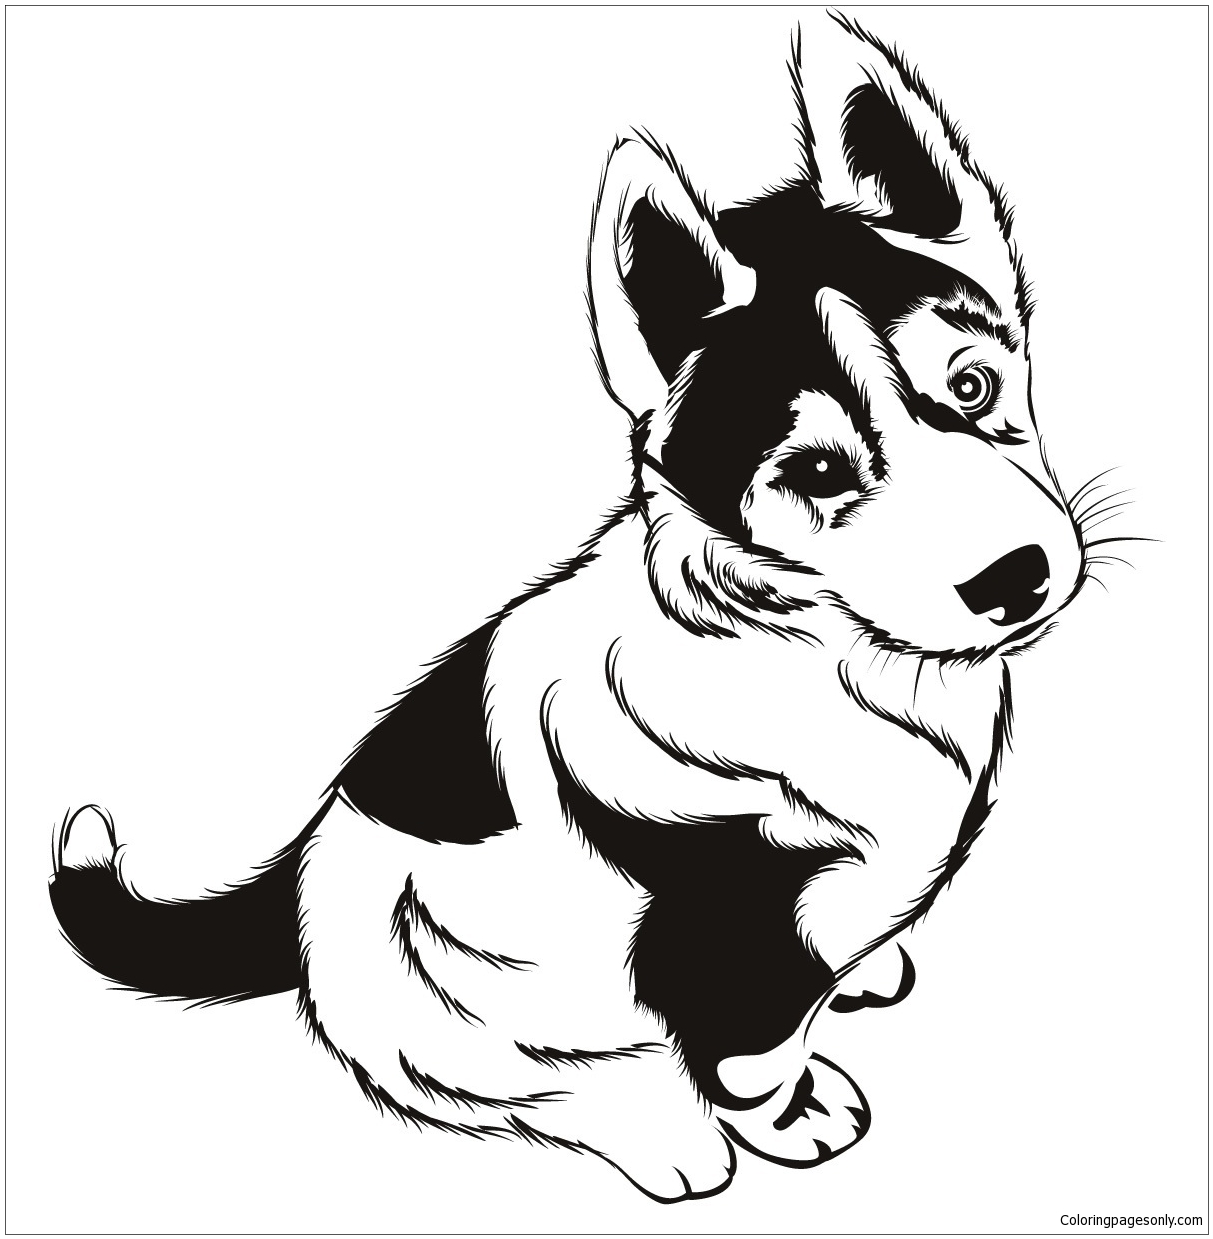 Husky Puppies Coloring Page - Free Coloring Pages Online